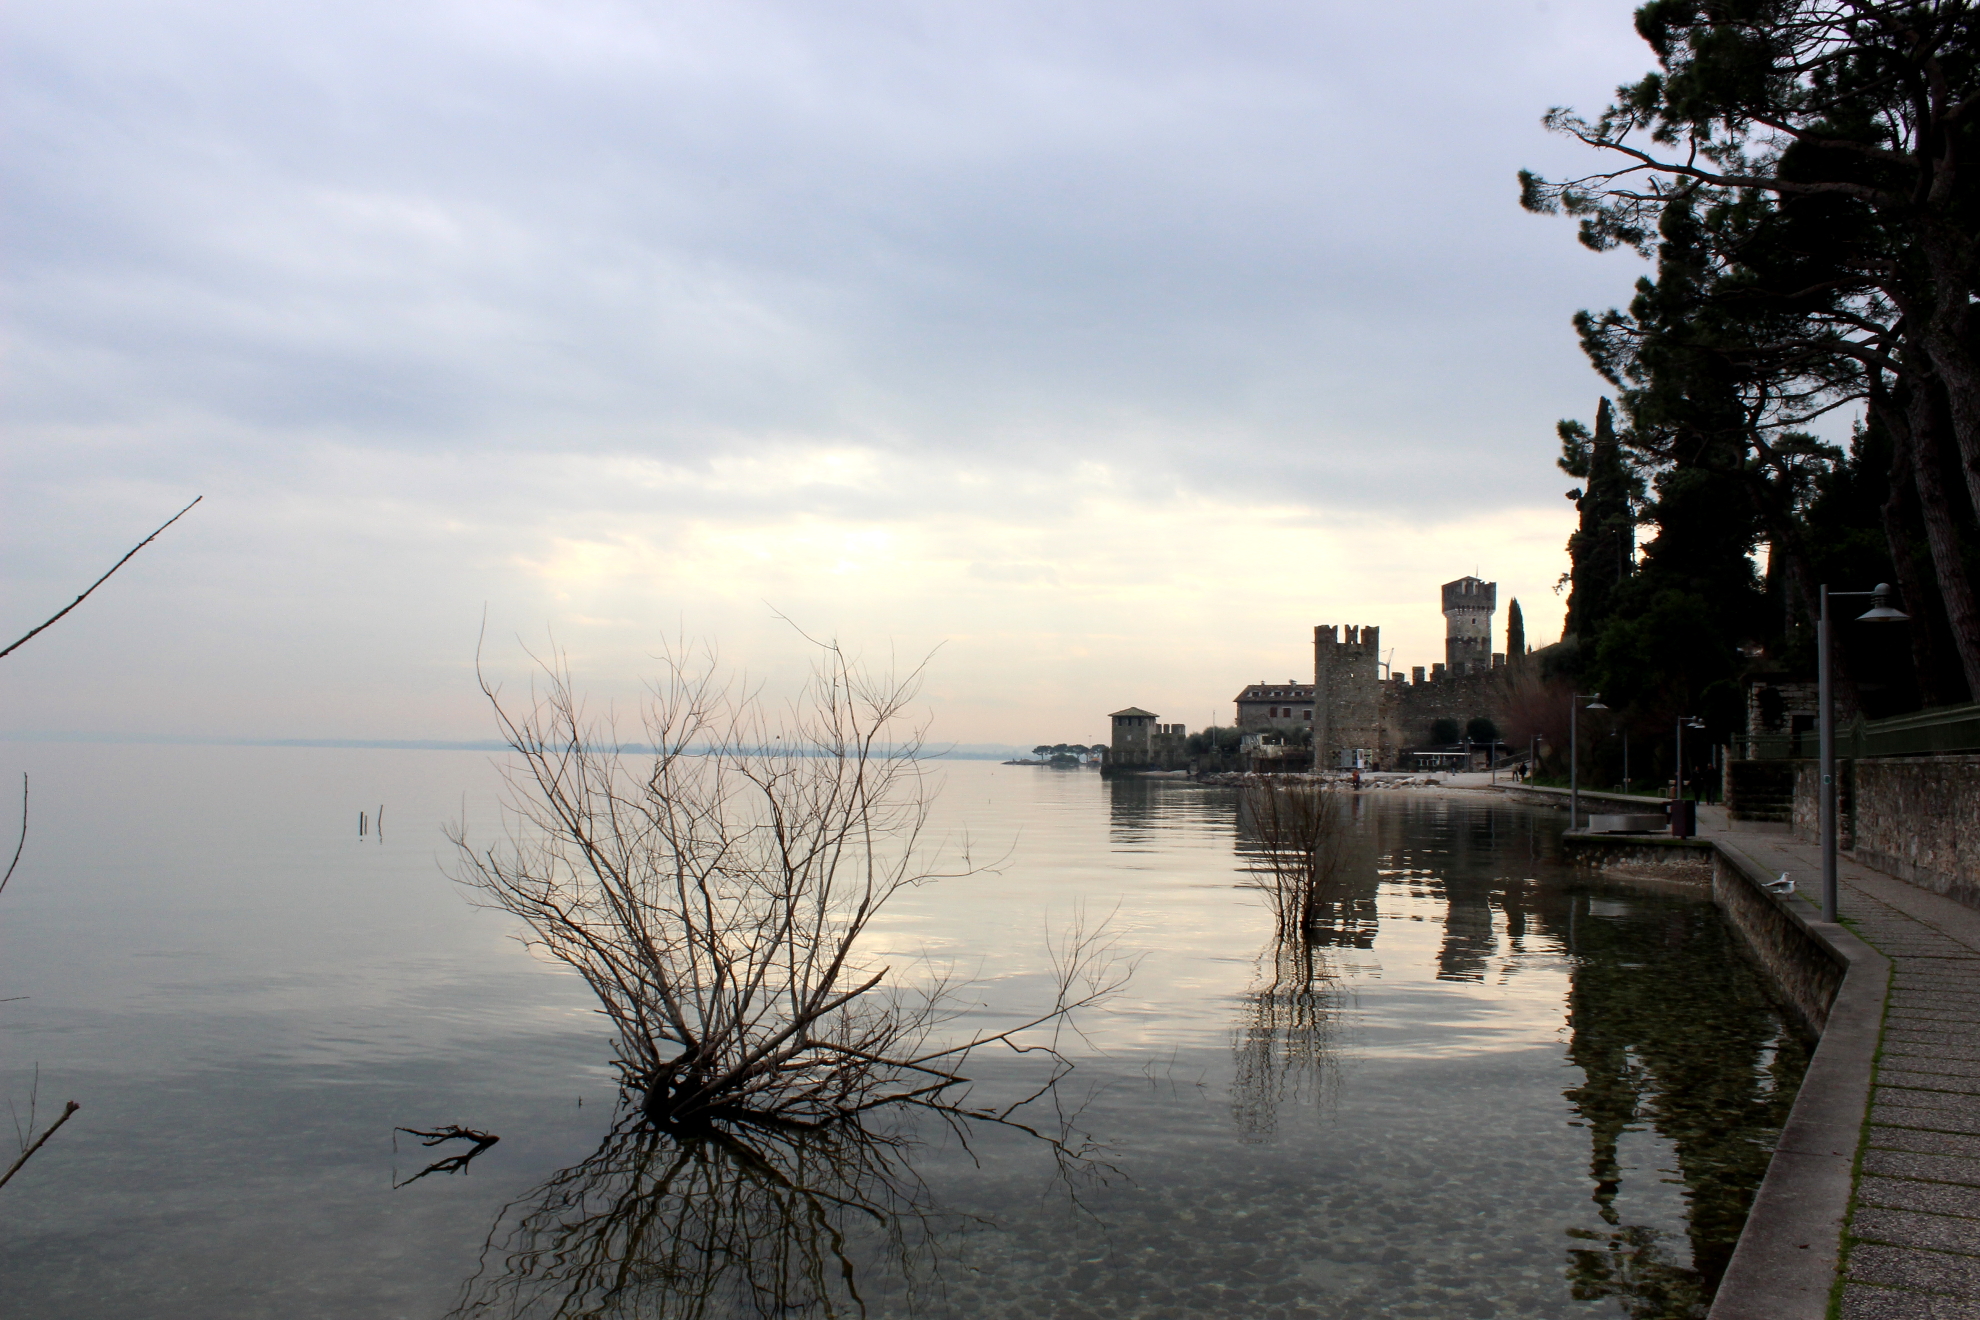 Reflections in Sirmione...